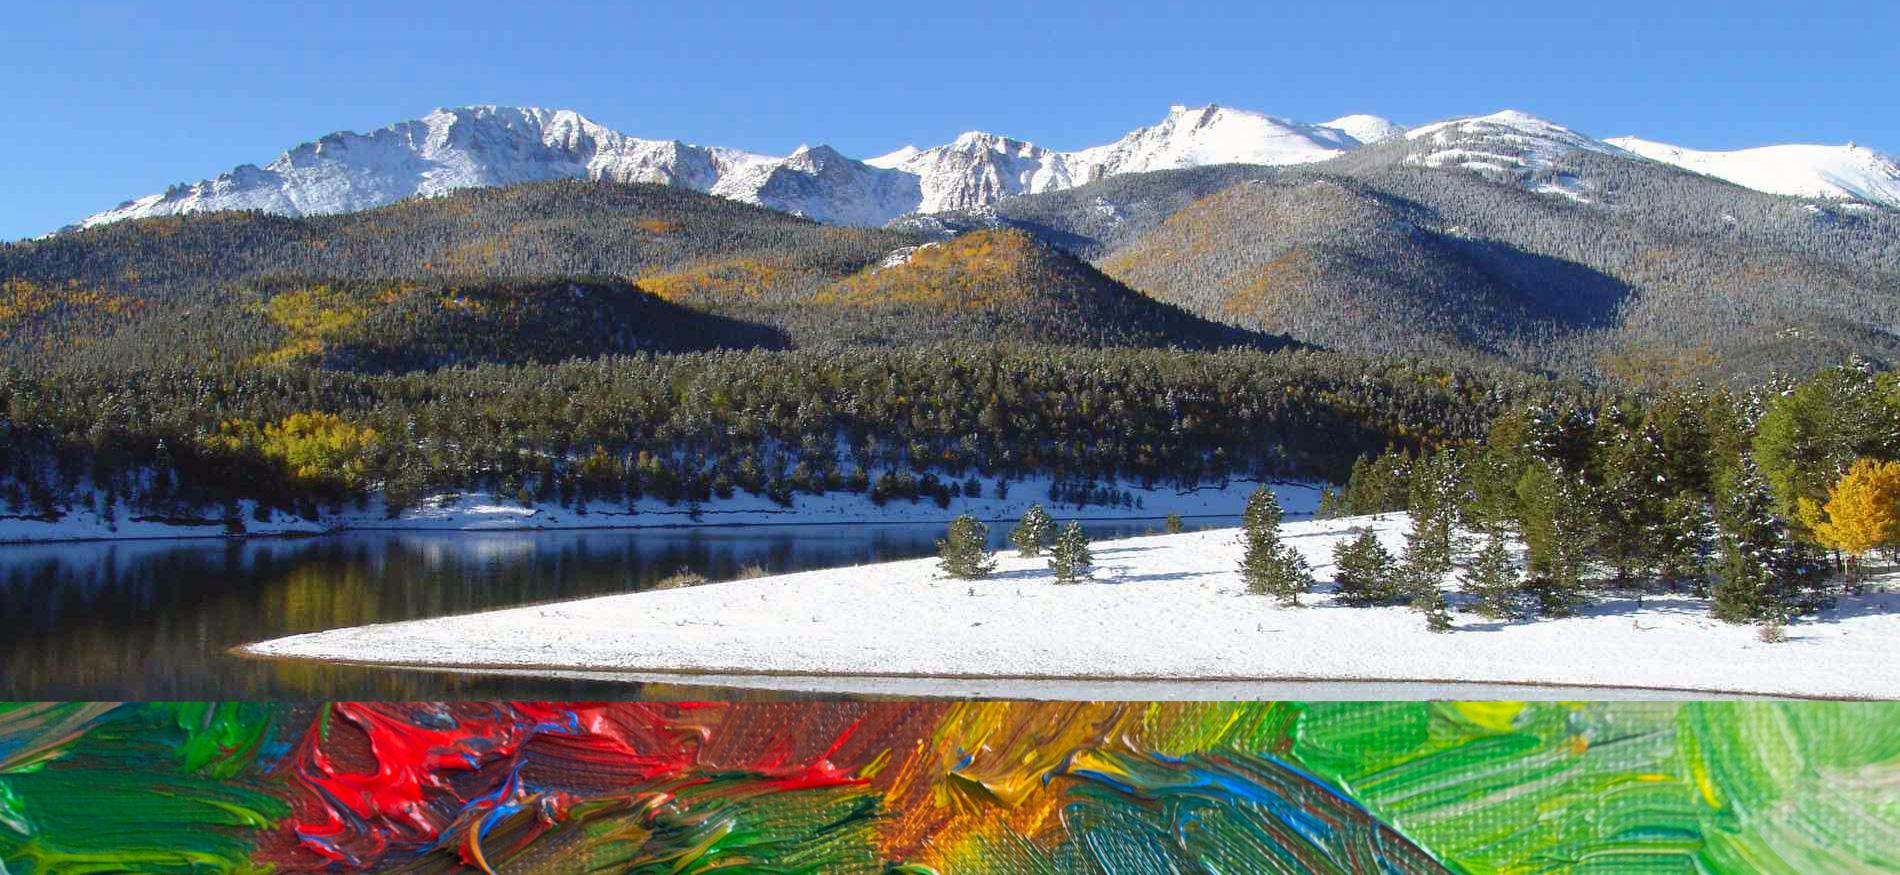 Pikes Peak Courtesy Of Carol Milisen - a member of The Mountain Artists